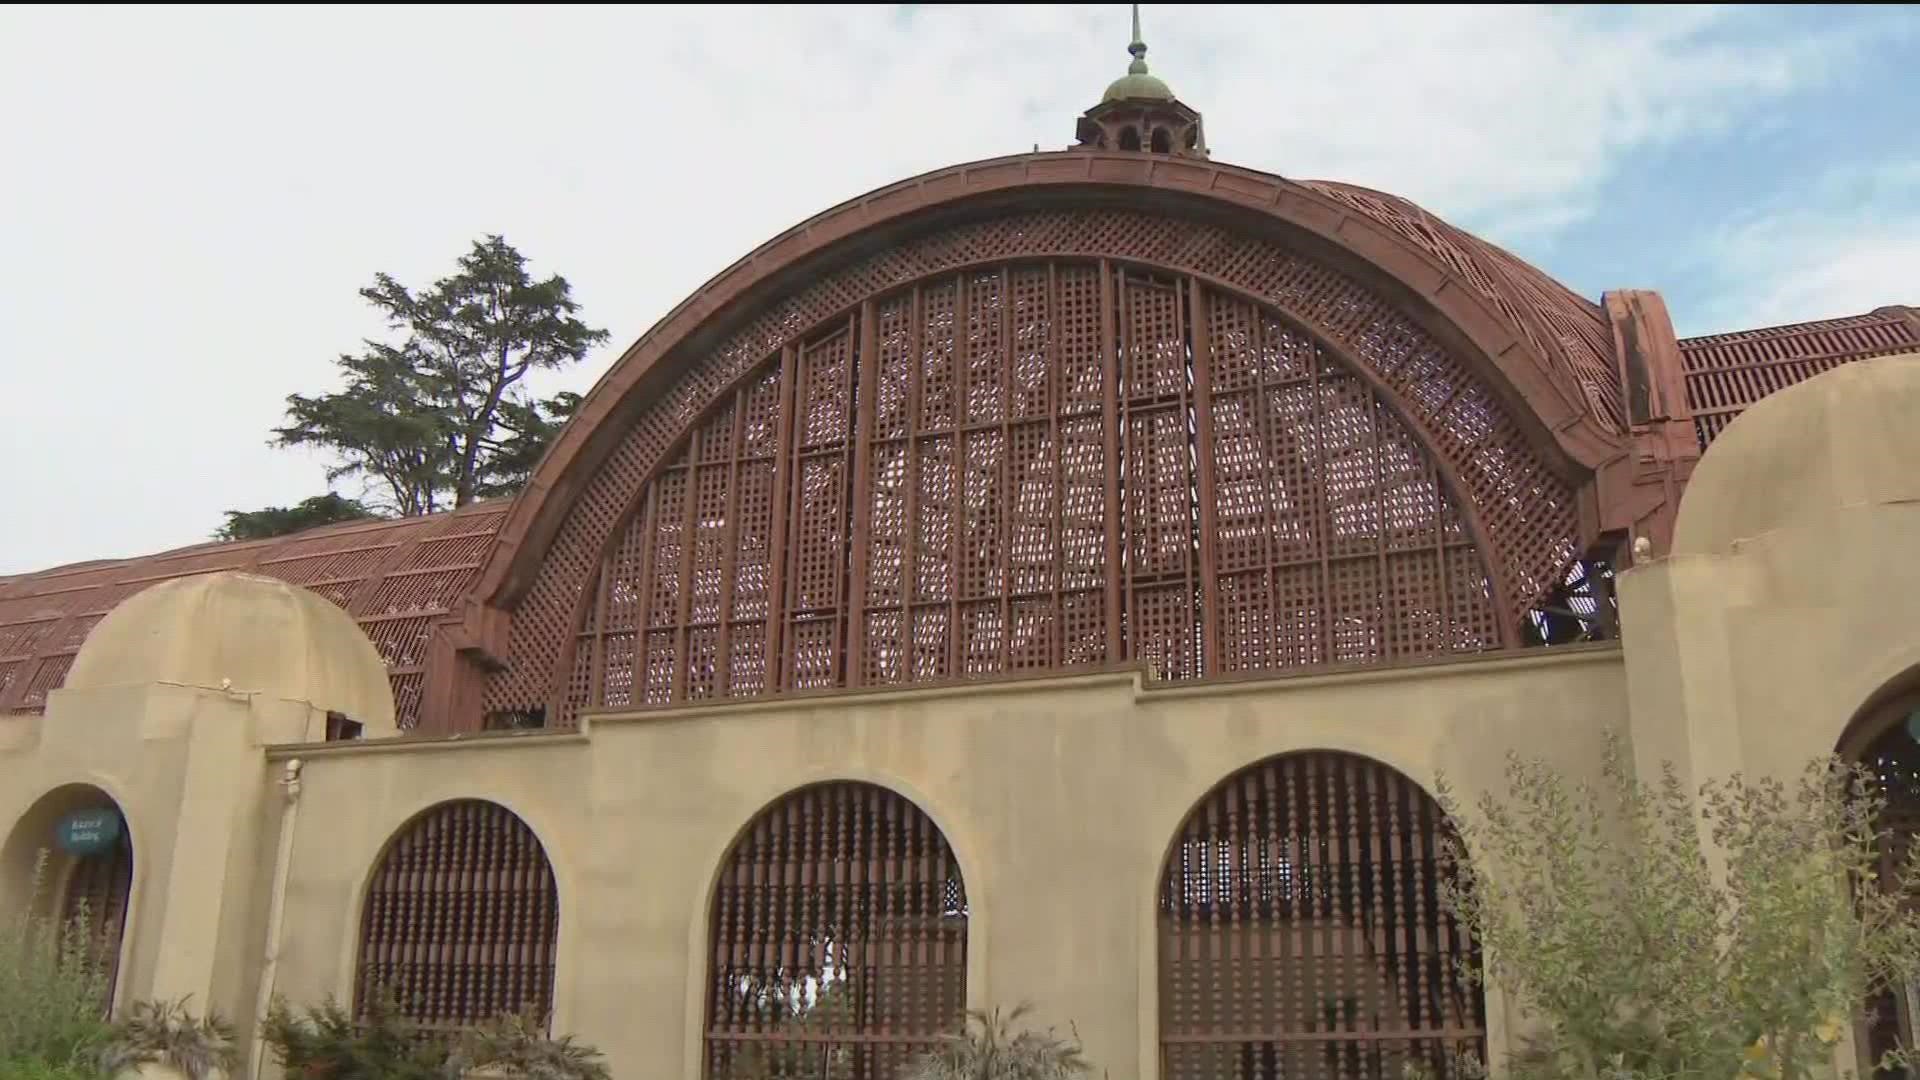 The Botanical Building was built in 1915 as part of the Panama-California Exposition and is one of only four structures that were designed to remain permanent.